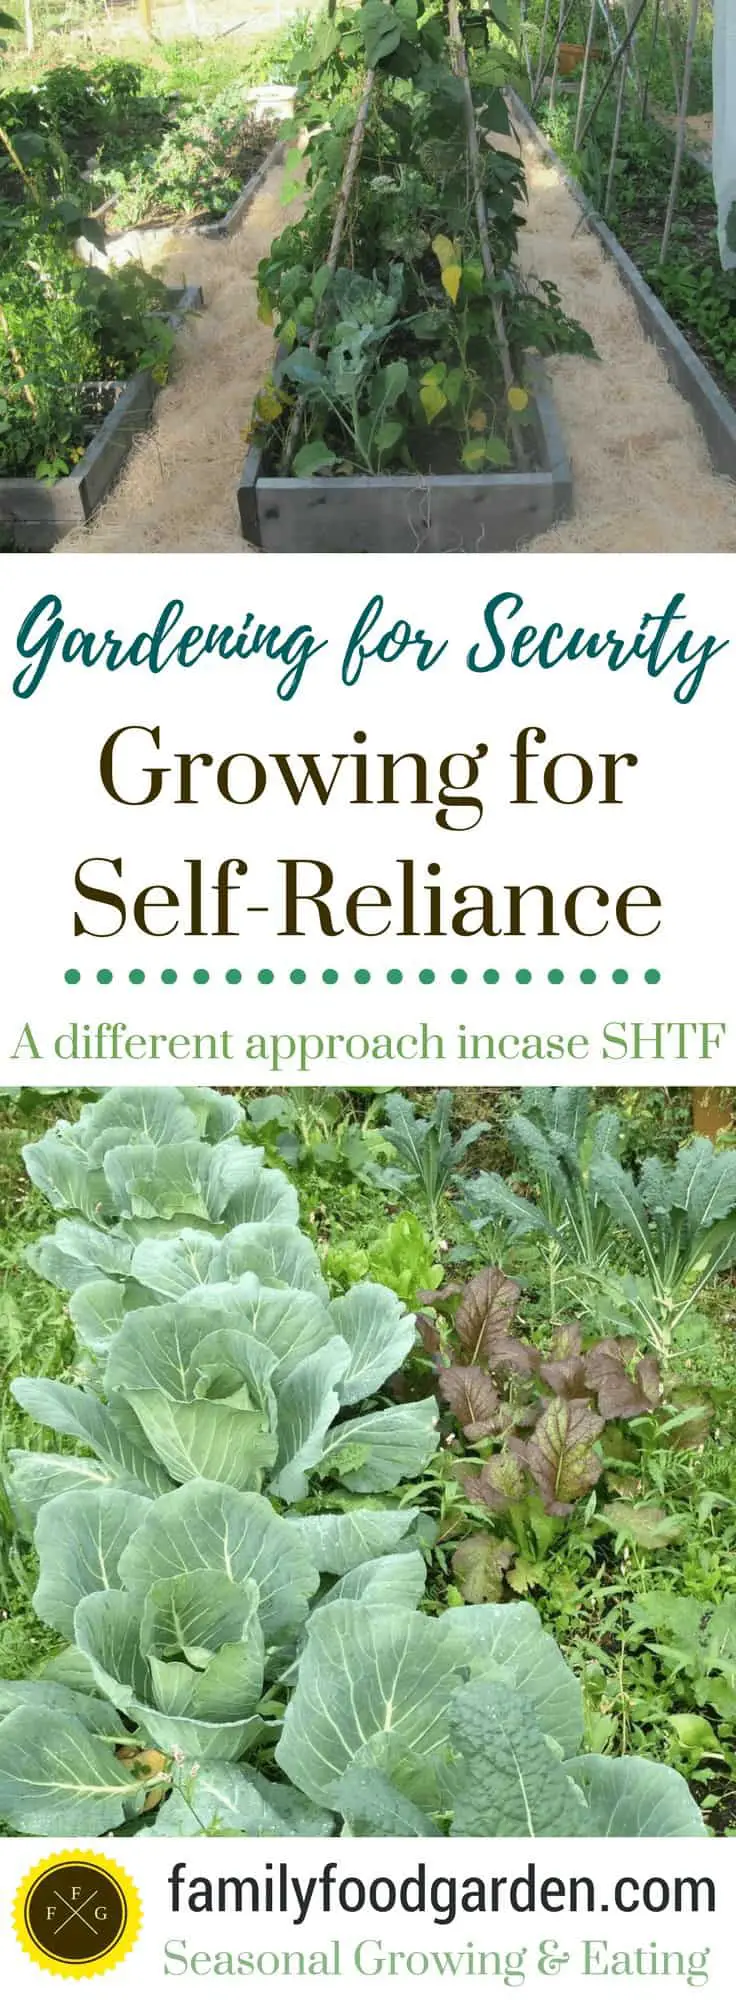 Gardening for Security Growing for Self-Reliance